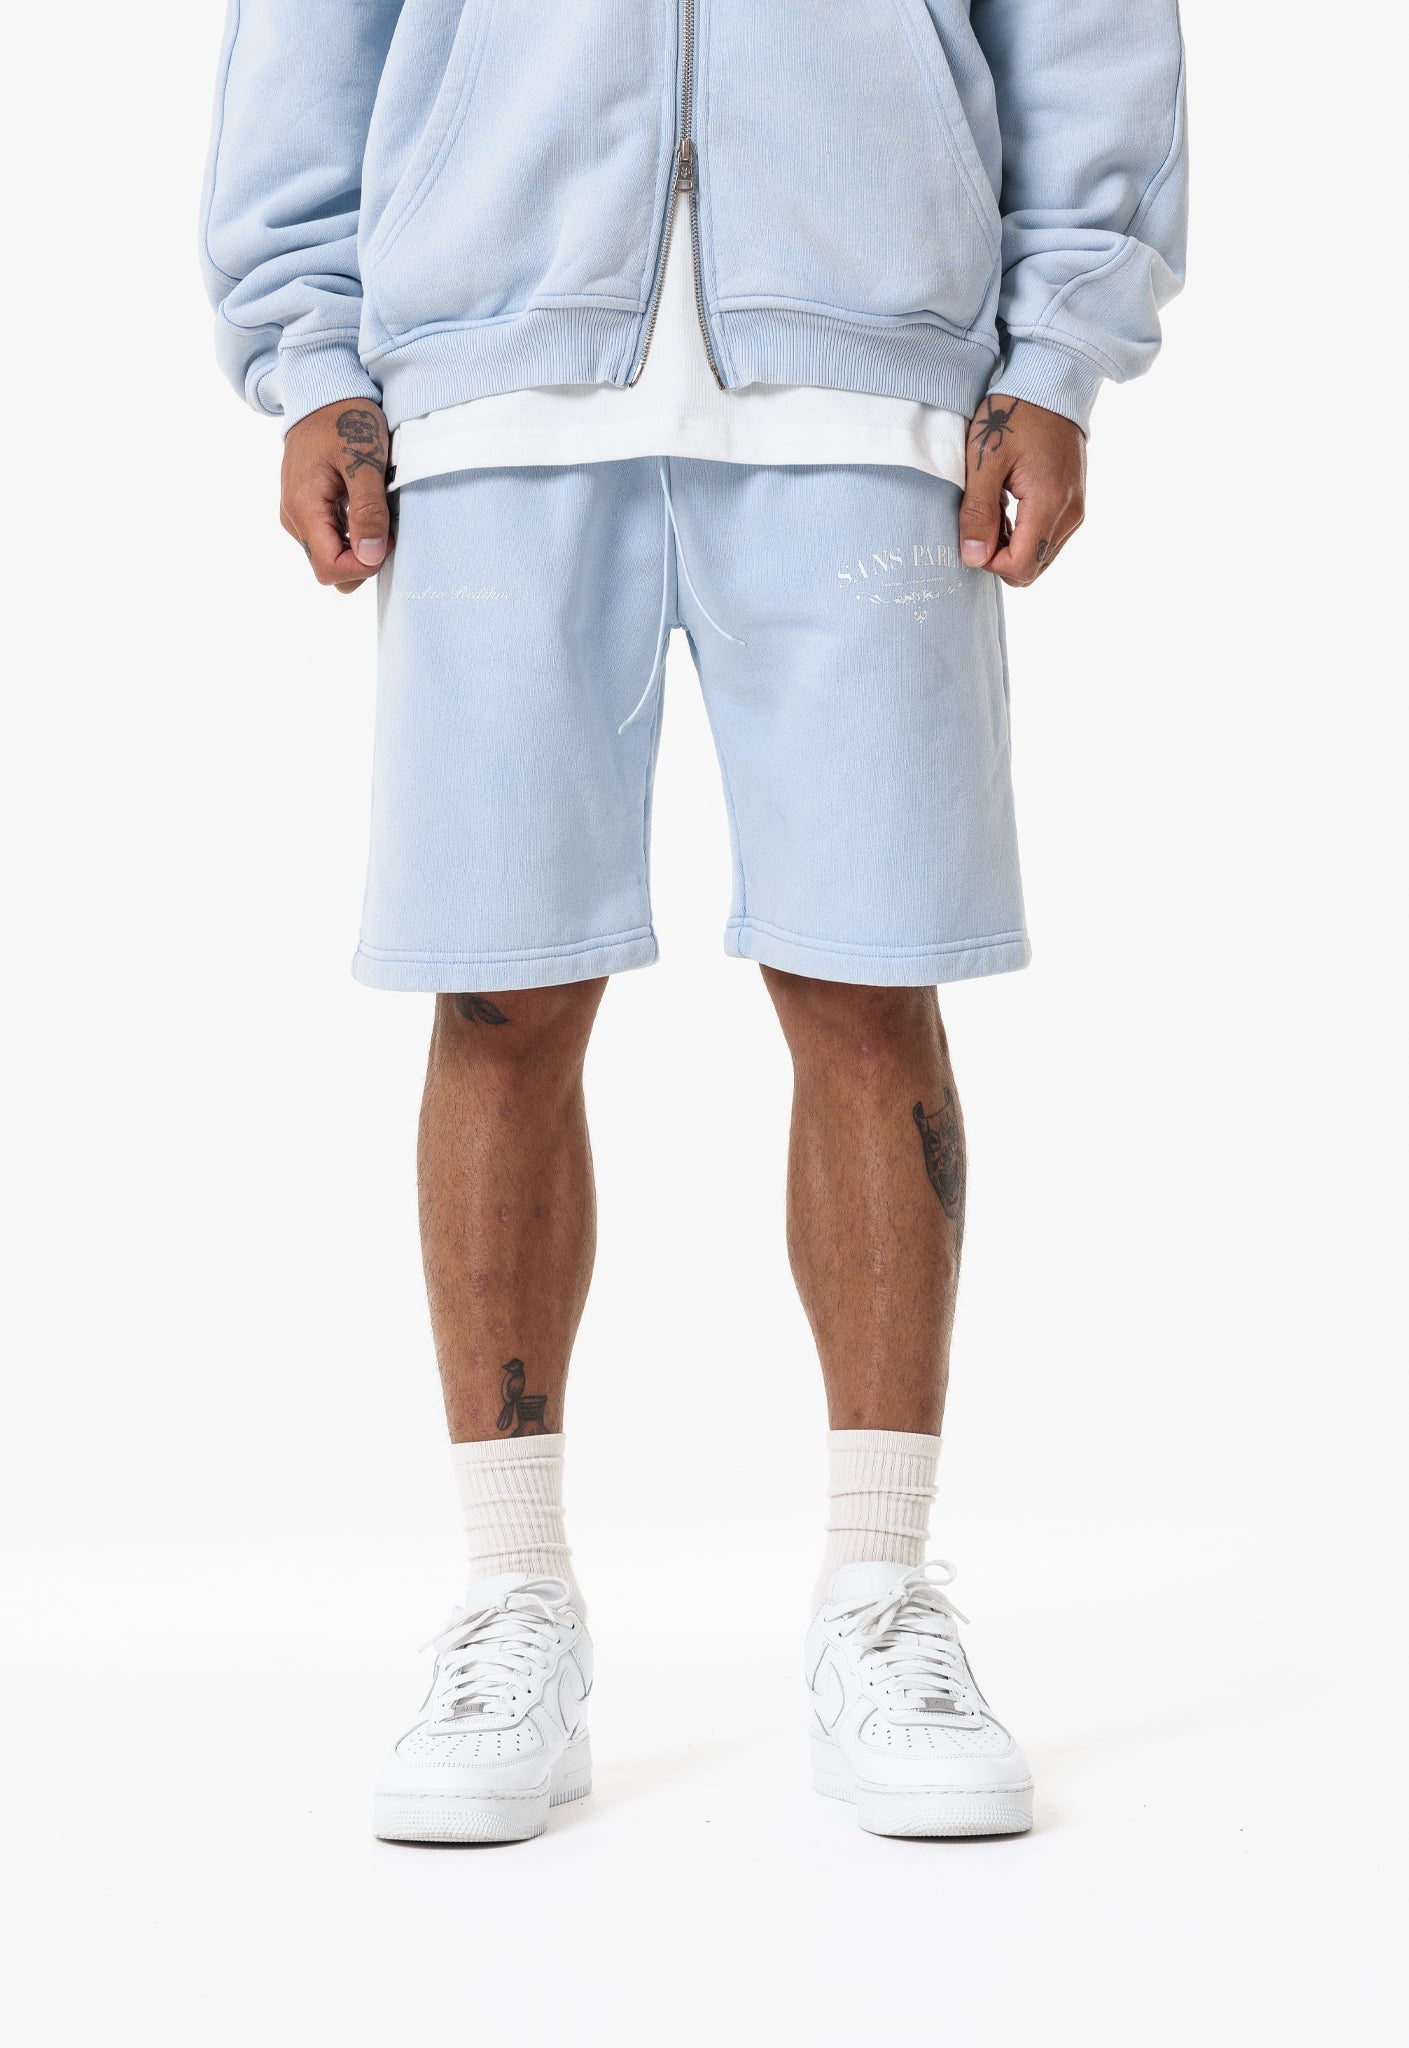 Heavyweight Appliqué Shorts - Washed Baby Blue